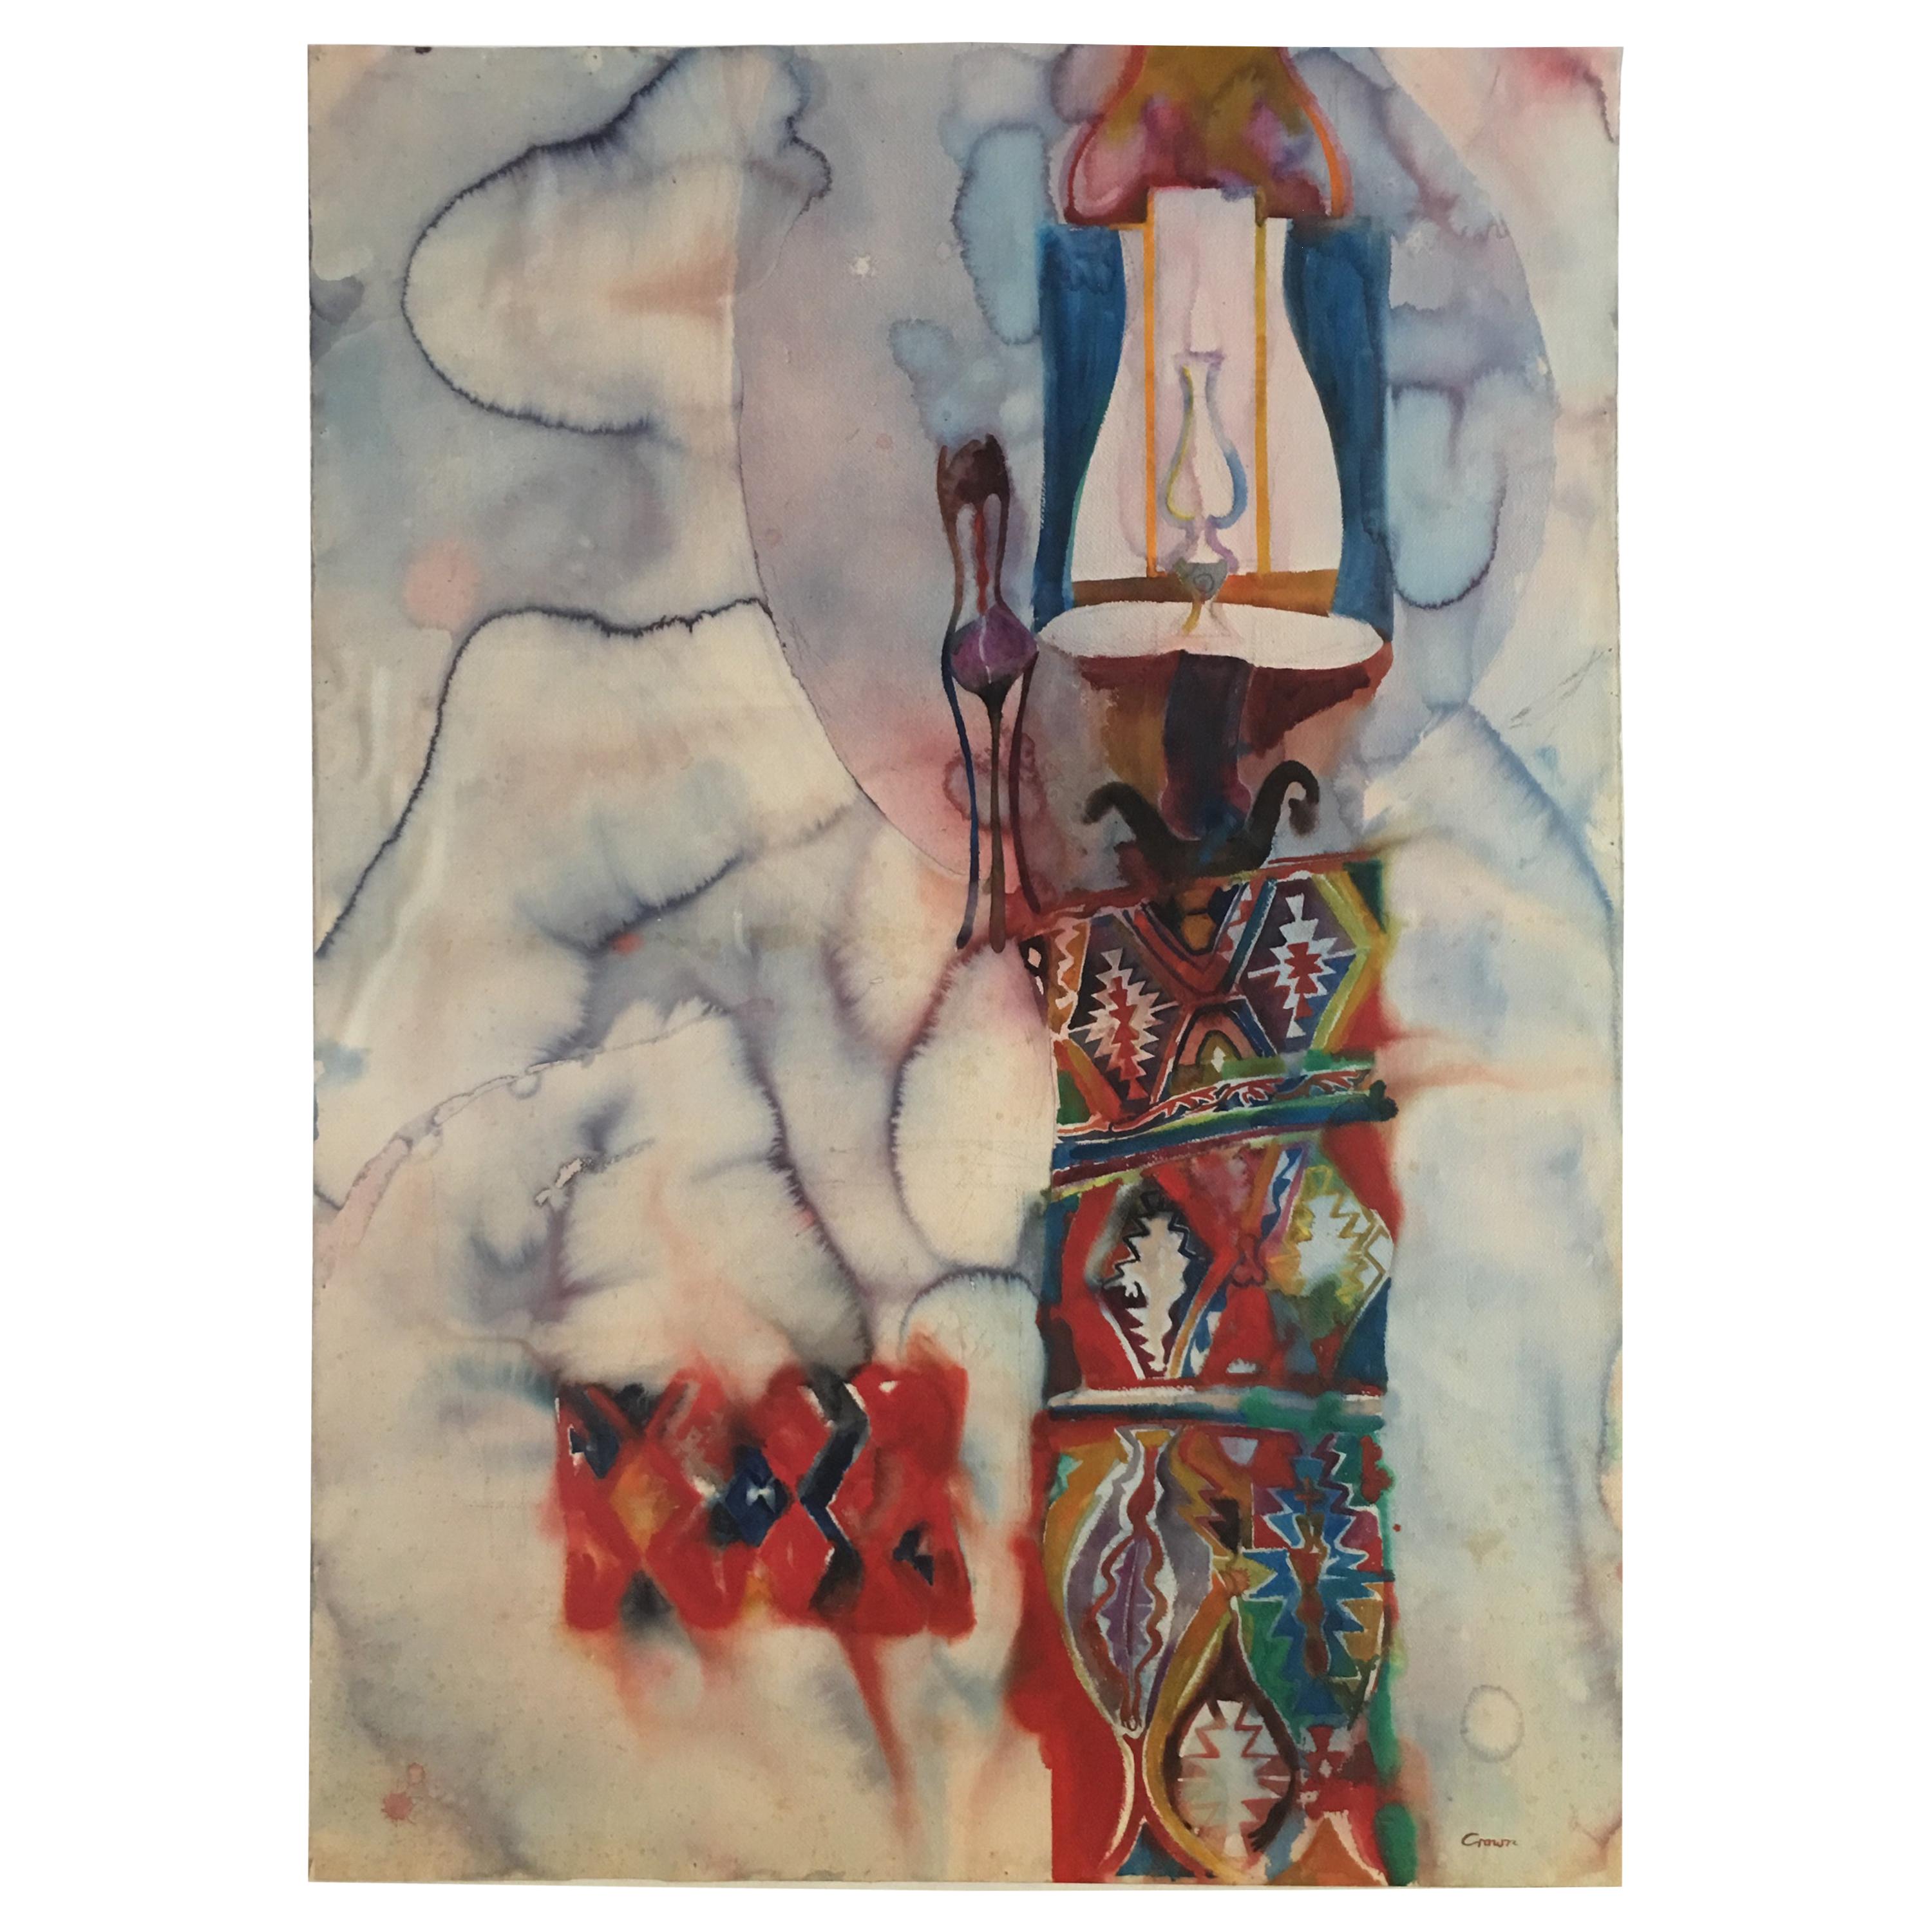 Large Watercolor Painting on hand pressed paper from a 1980s California Studio